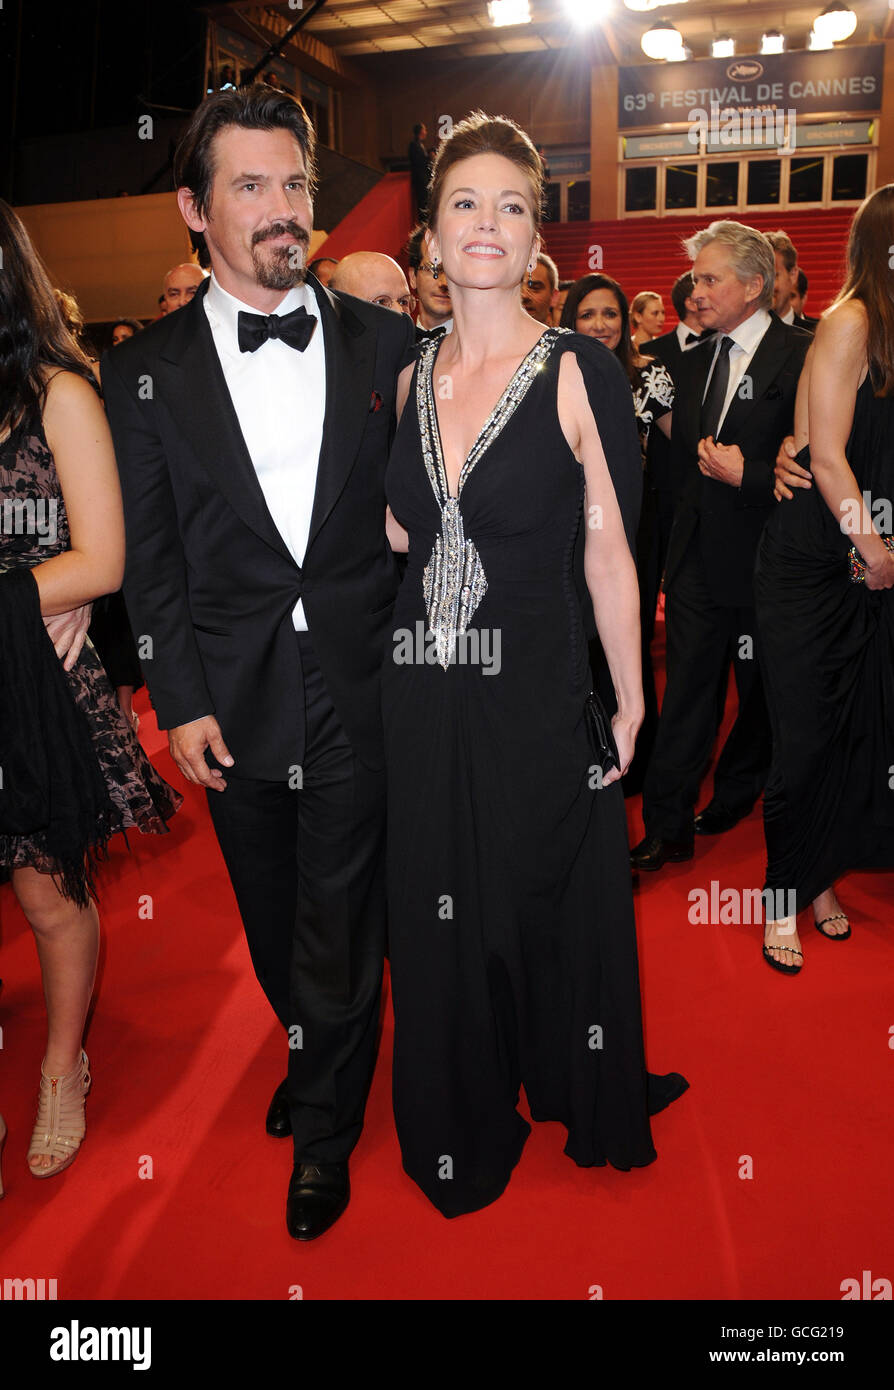 Josh Brolin and Diane Lane depart after the screening of Wall Street: Money Never Sleeps at the Grand Auditorium Lumiere during the Cannes Film Festival, France. Stock Photo